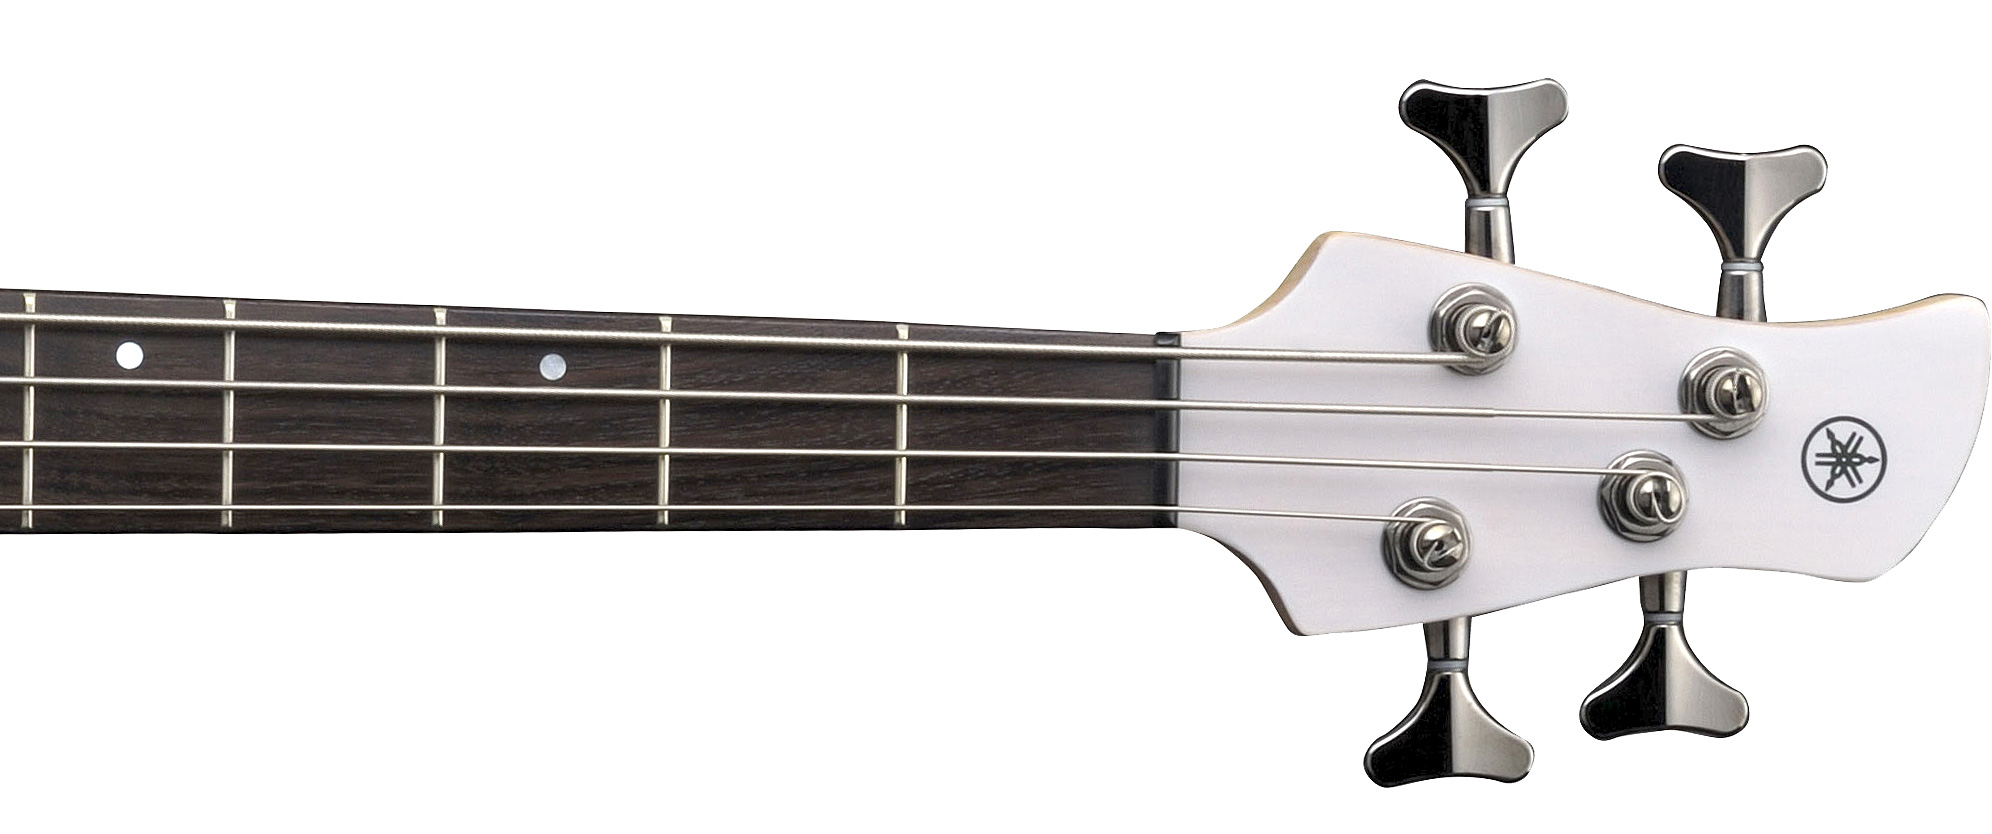 Yamaha TRBX504 TWH - translucent white Solid body electric bass white